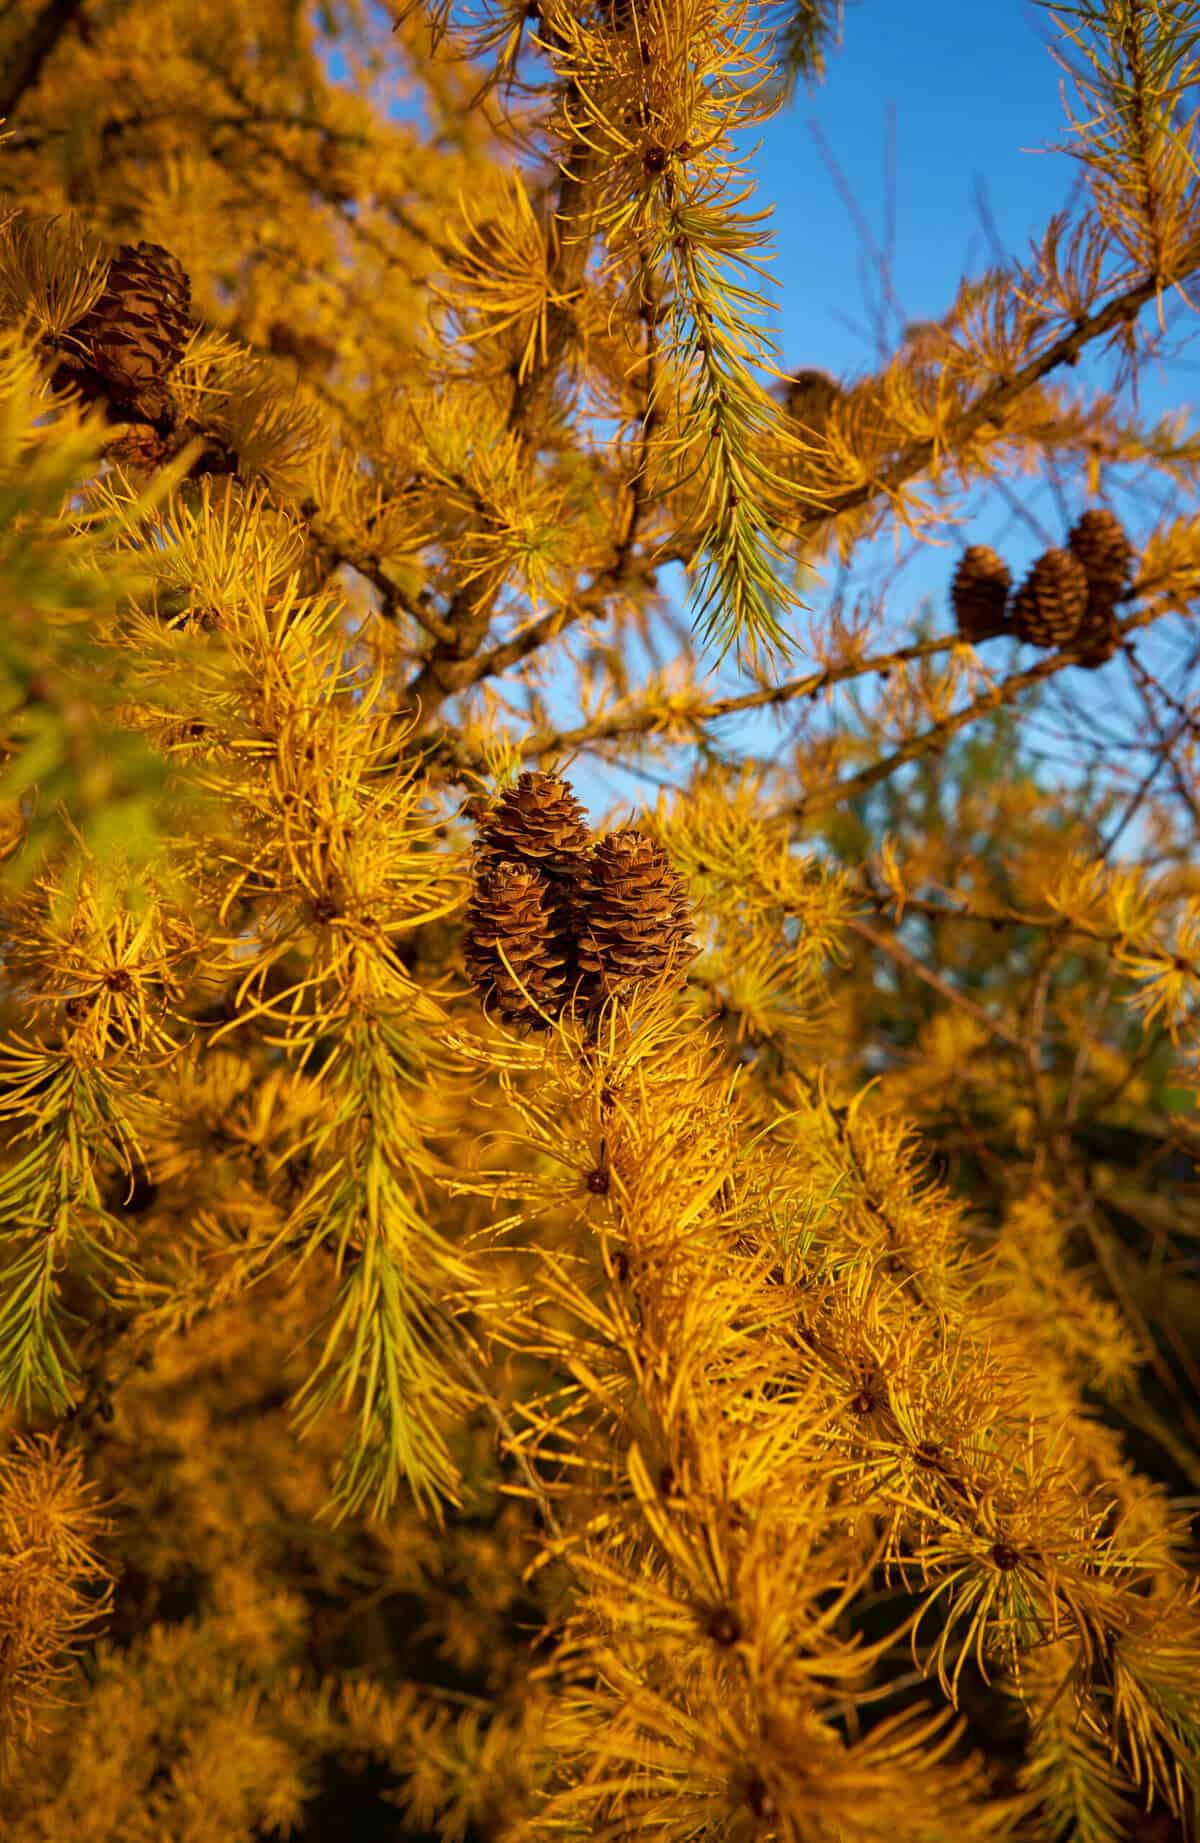 Close-up of golden yellow weeping larch needles with multiple brown cones on a branch, set against a bright blue sky.